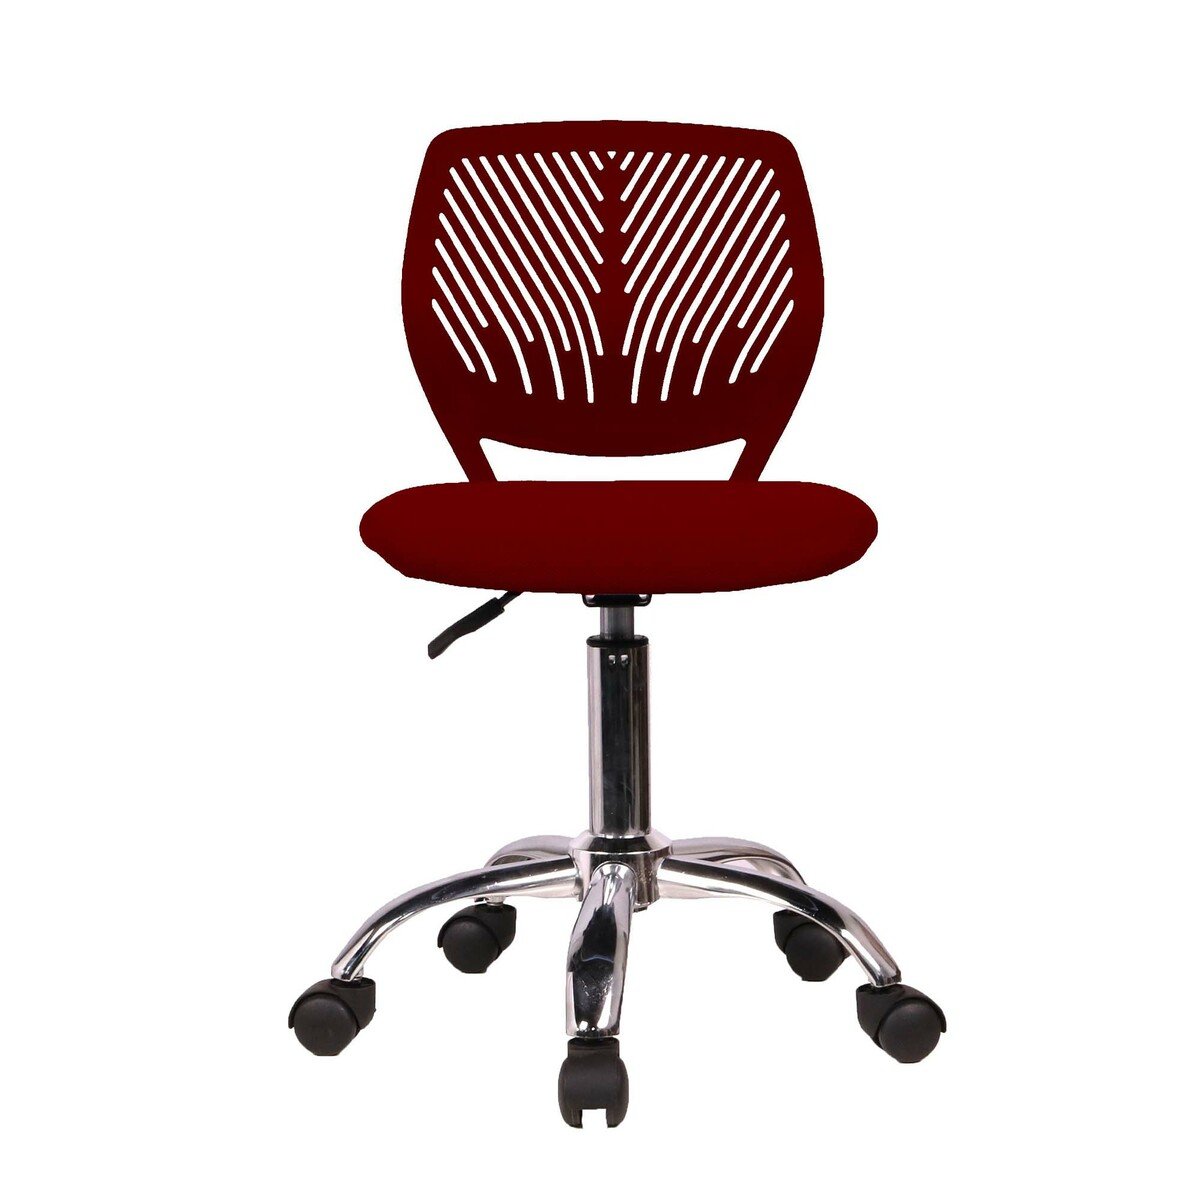 Maple Leaf Study Chair AD-0242 Red